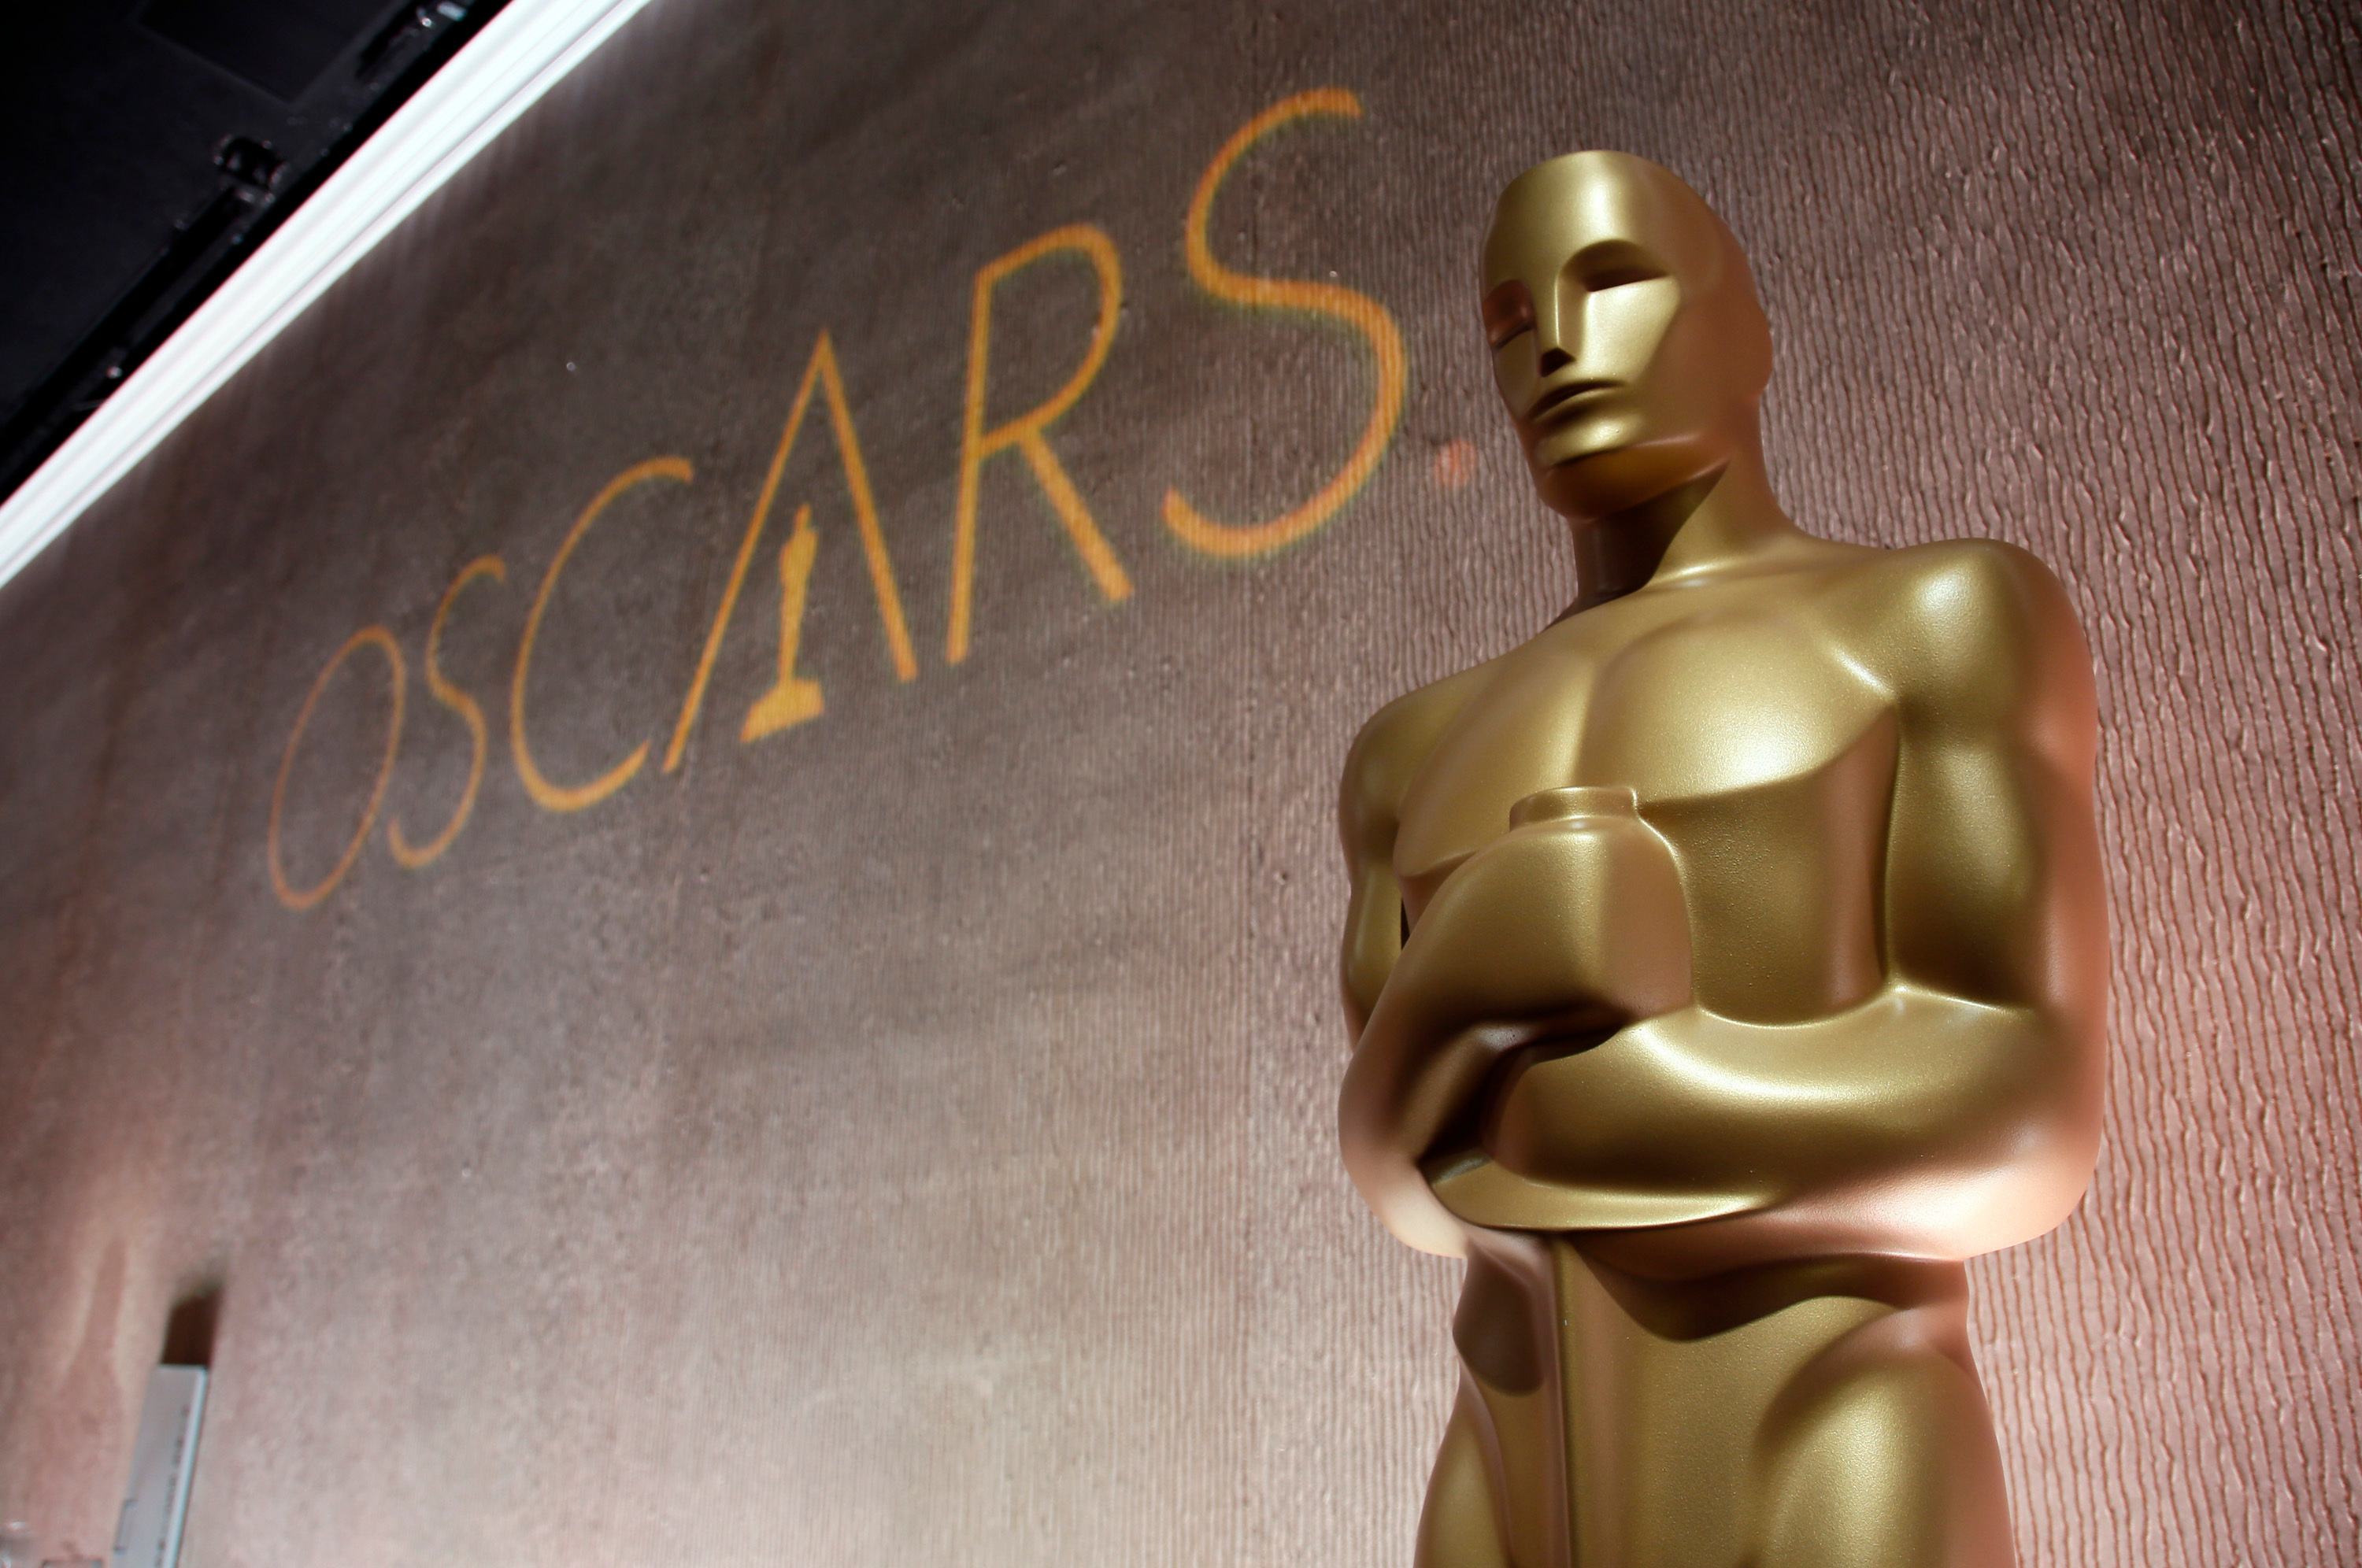 How To Watch The 2021 Oscars 4 25 21 Nominees Tv Channel Time Free Live Stream For 93rd Academy Awards Syracuse Com